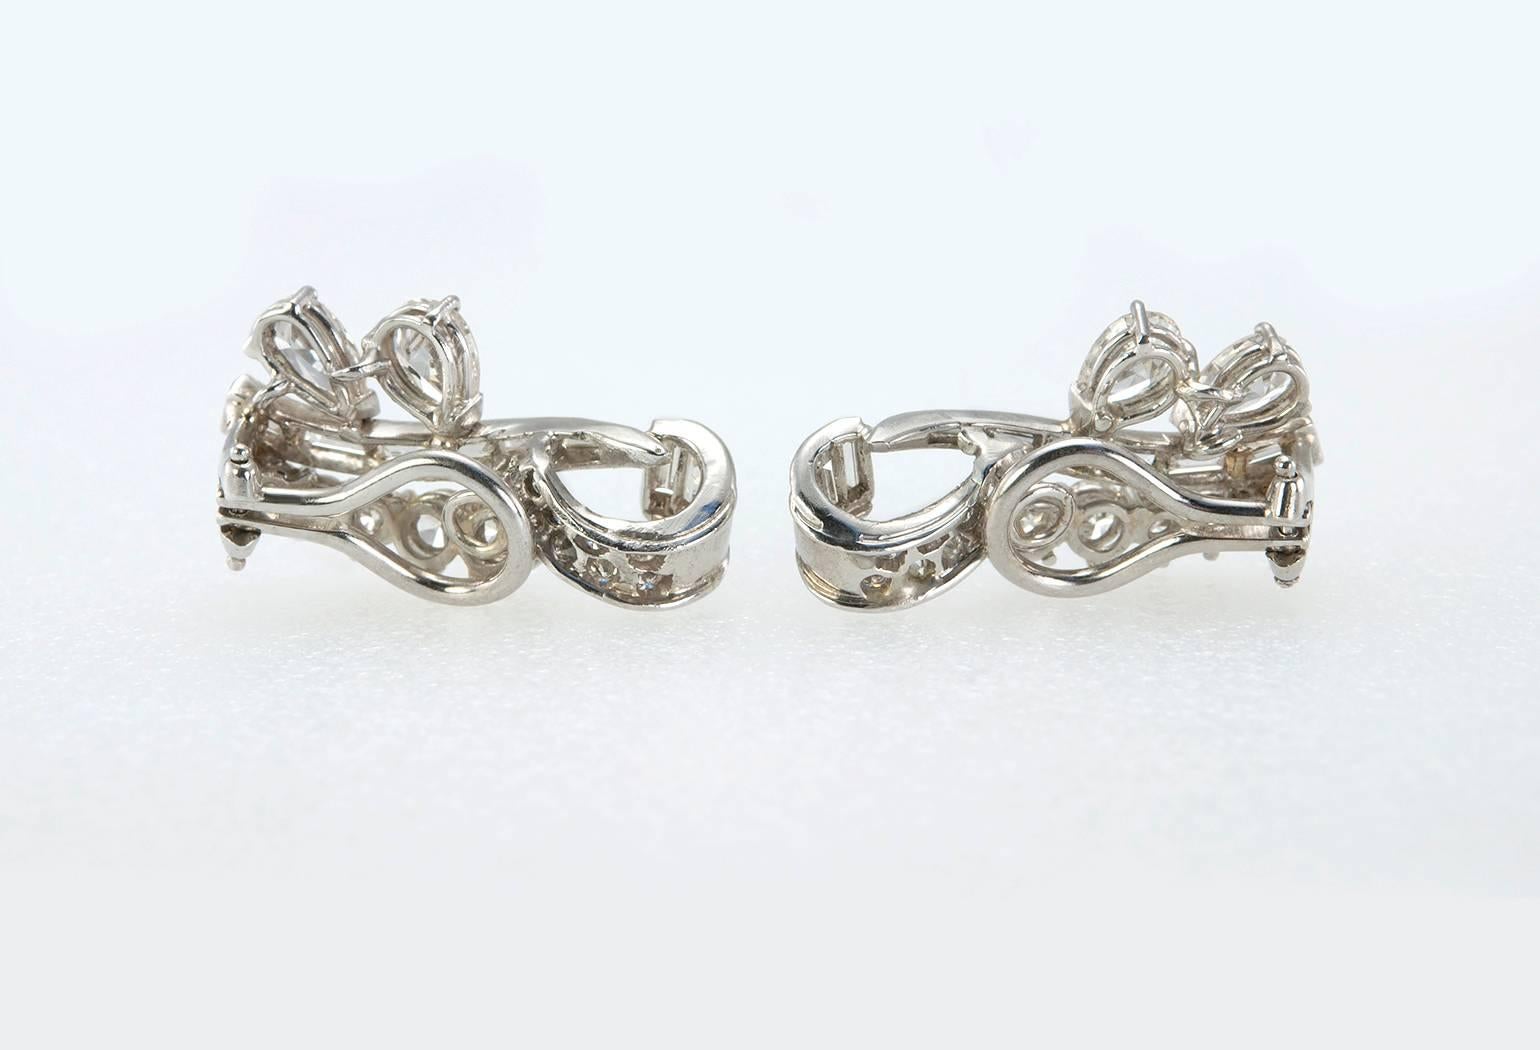 Diamond Platinum Ear Crawler Earrings In Excellent Condition For Sale In Los Angeles, CA